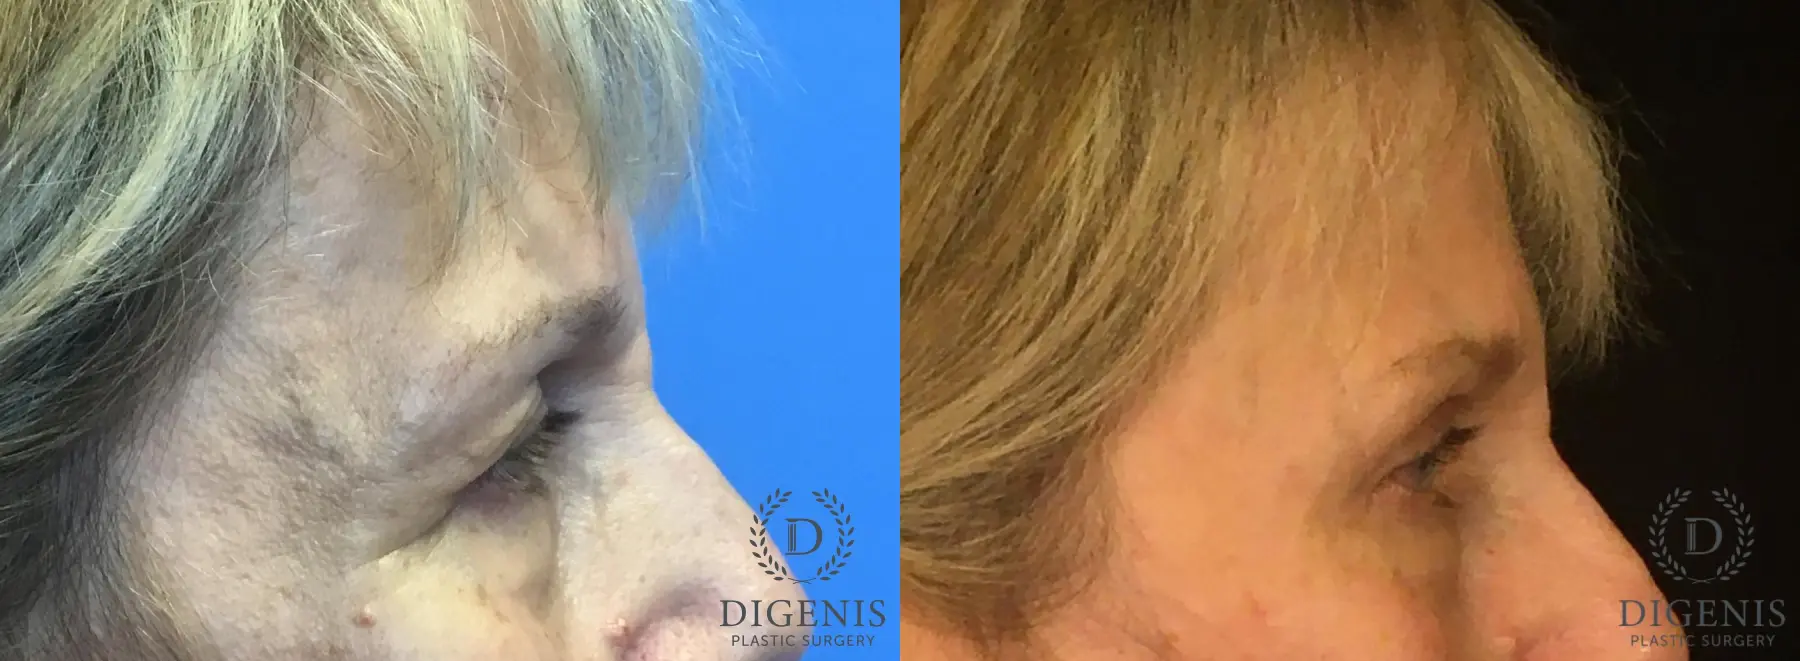 Eyelid Surgery: Patient 5 - Before and After 3